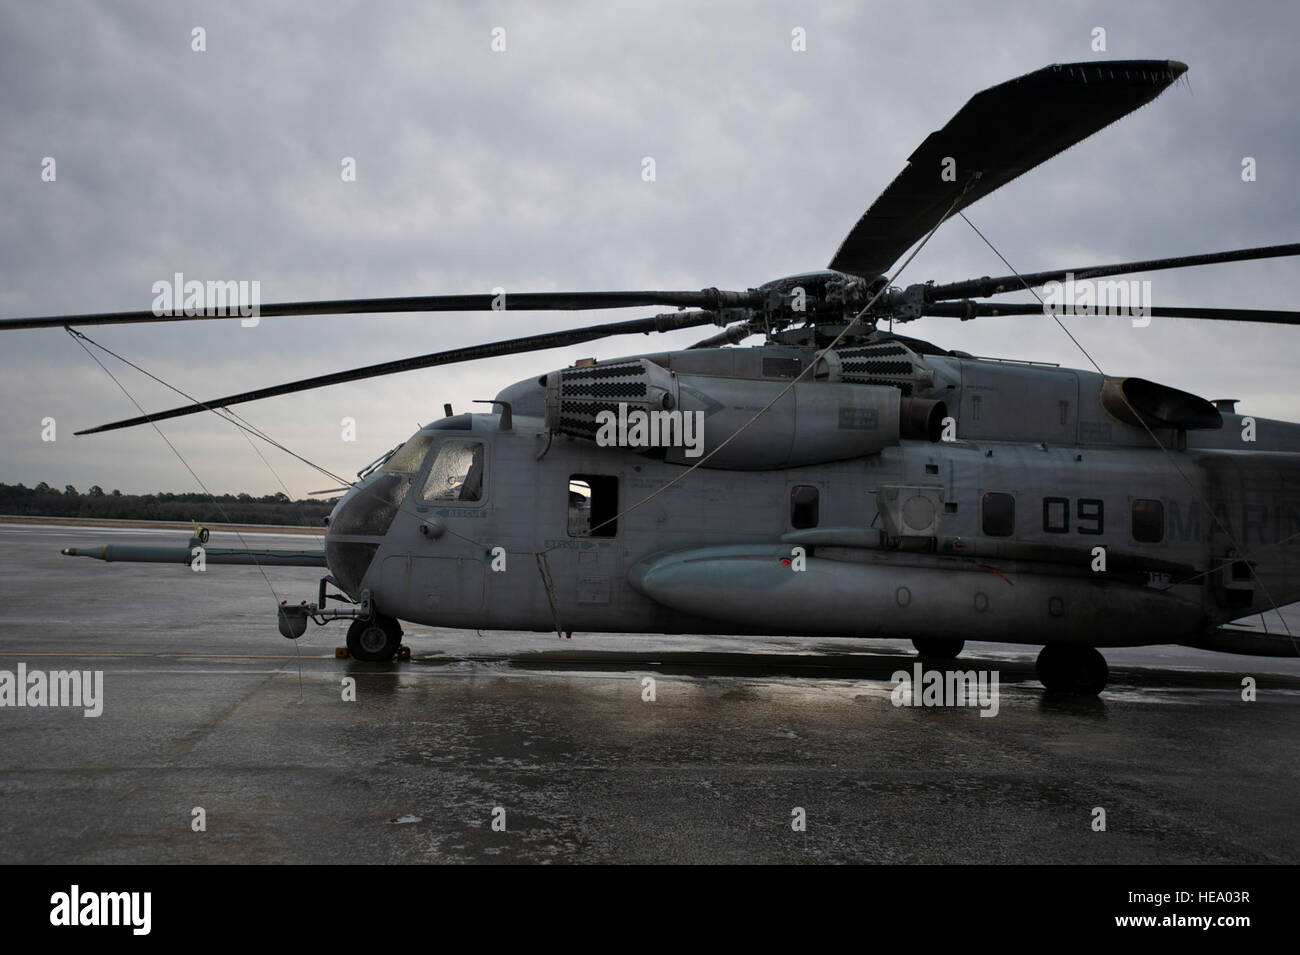 A U.S. Marine Corps CH-53 helicopter sits on the frozen flight line at Hurlburt Field, Fla., Jan. 29, 2014. The entire flight line was covered with a sheet of ice, and all aircraft were secured with chains. (U.S. Air Force Photo/ Staff Sgt. John Bainter) Stock Photo